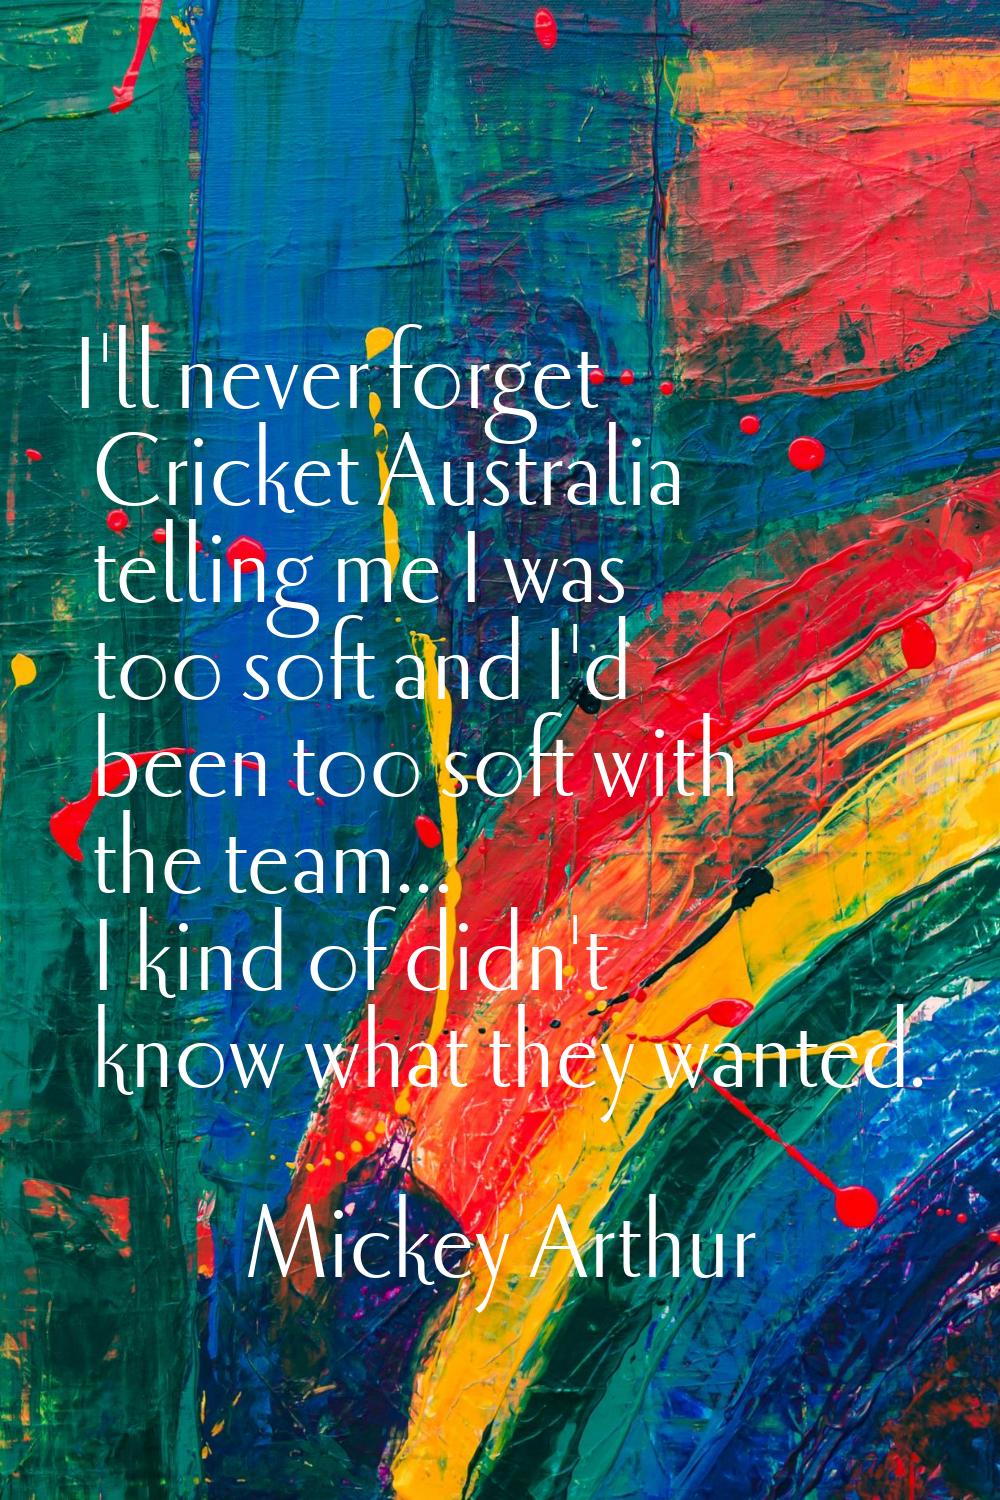 I'll never forget Cricket Australia telling me I was too soft and I'd been too soft with the team..